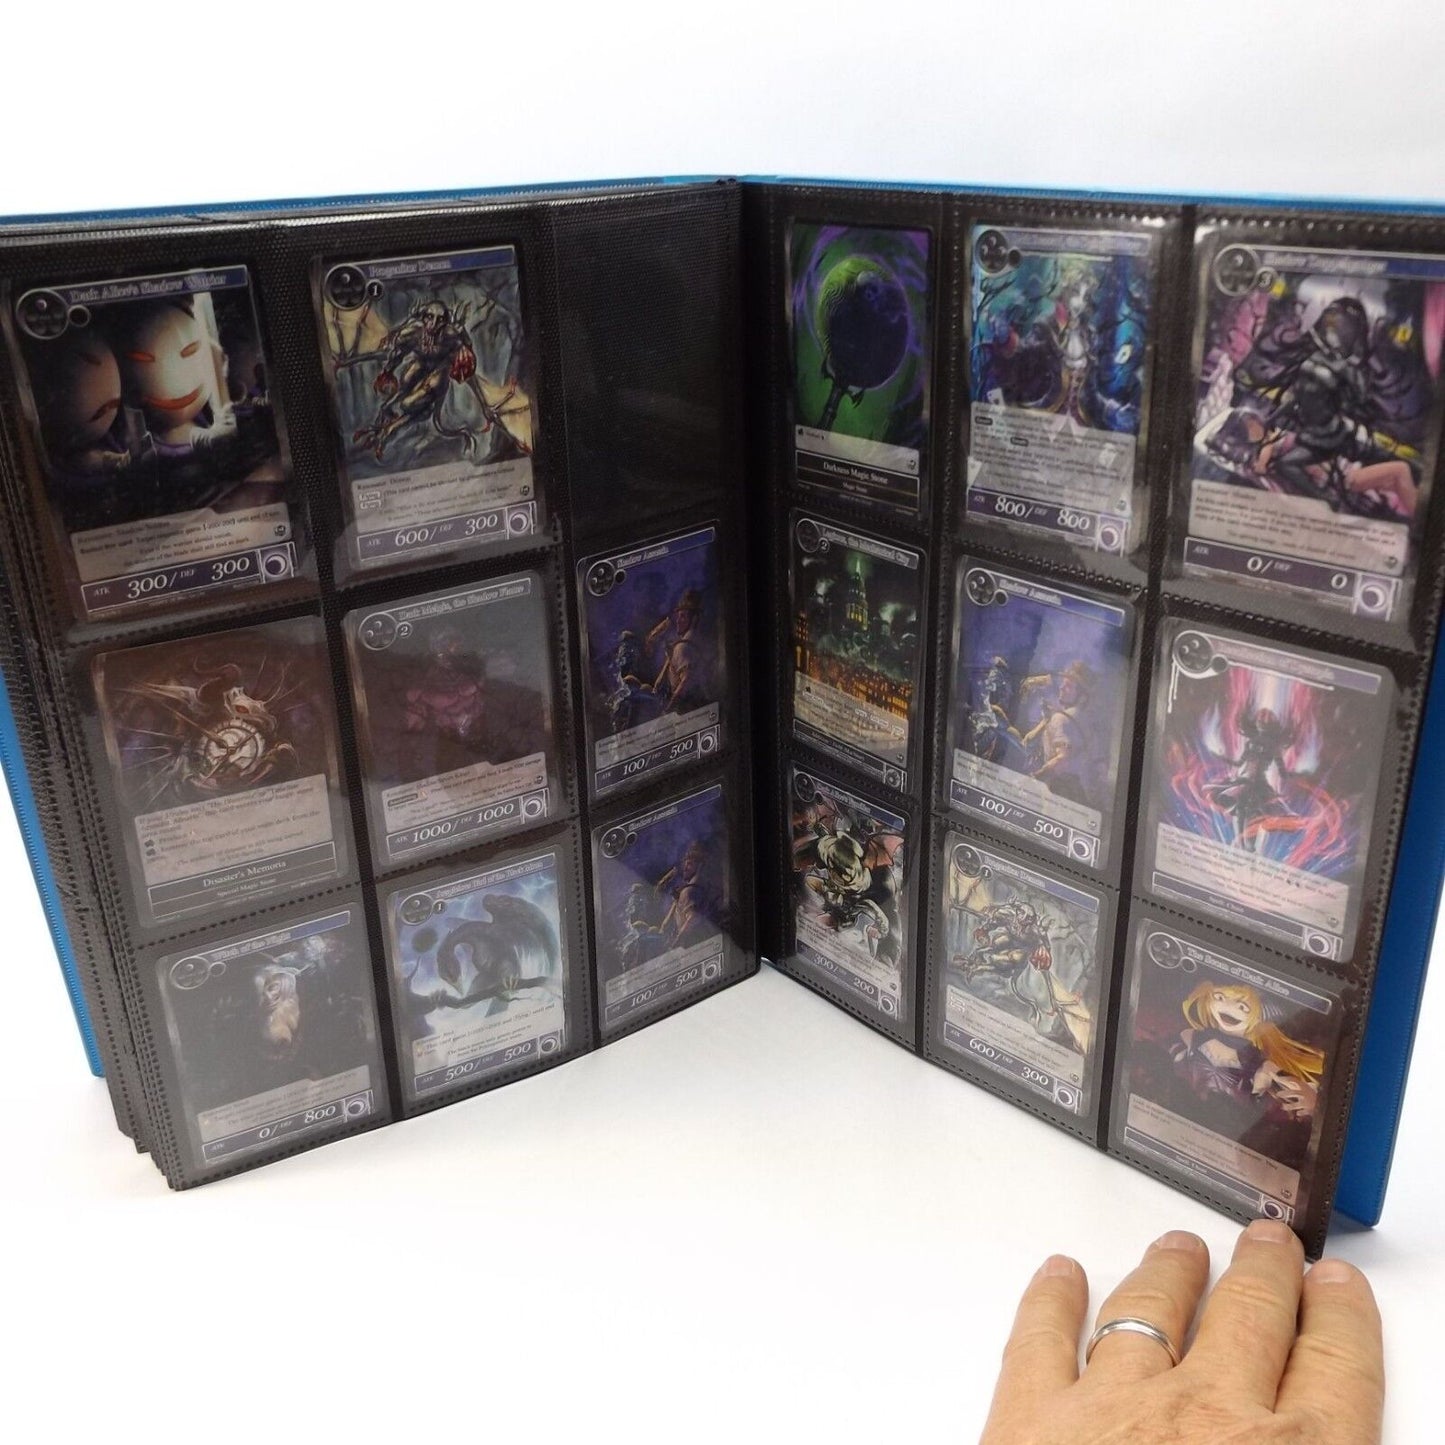 BOOK OF 288 PLUS FORCE OF WILL GAME CARDS IN PROTECTIVE SLEEVES